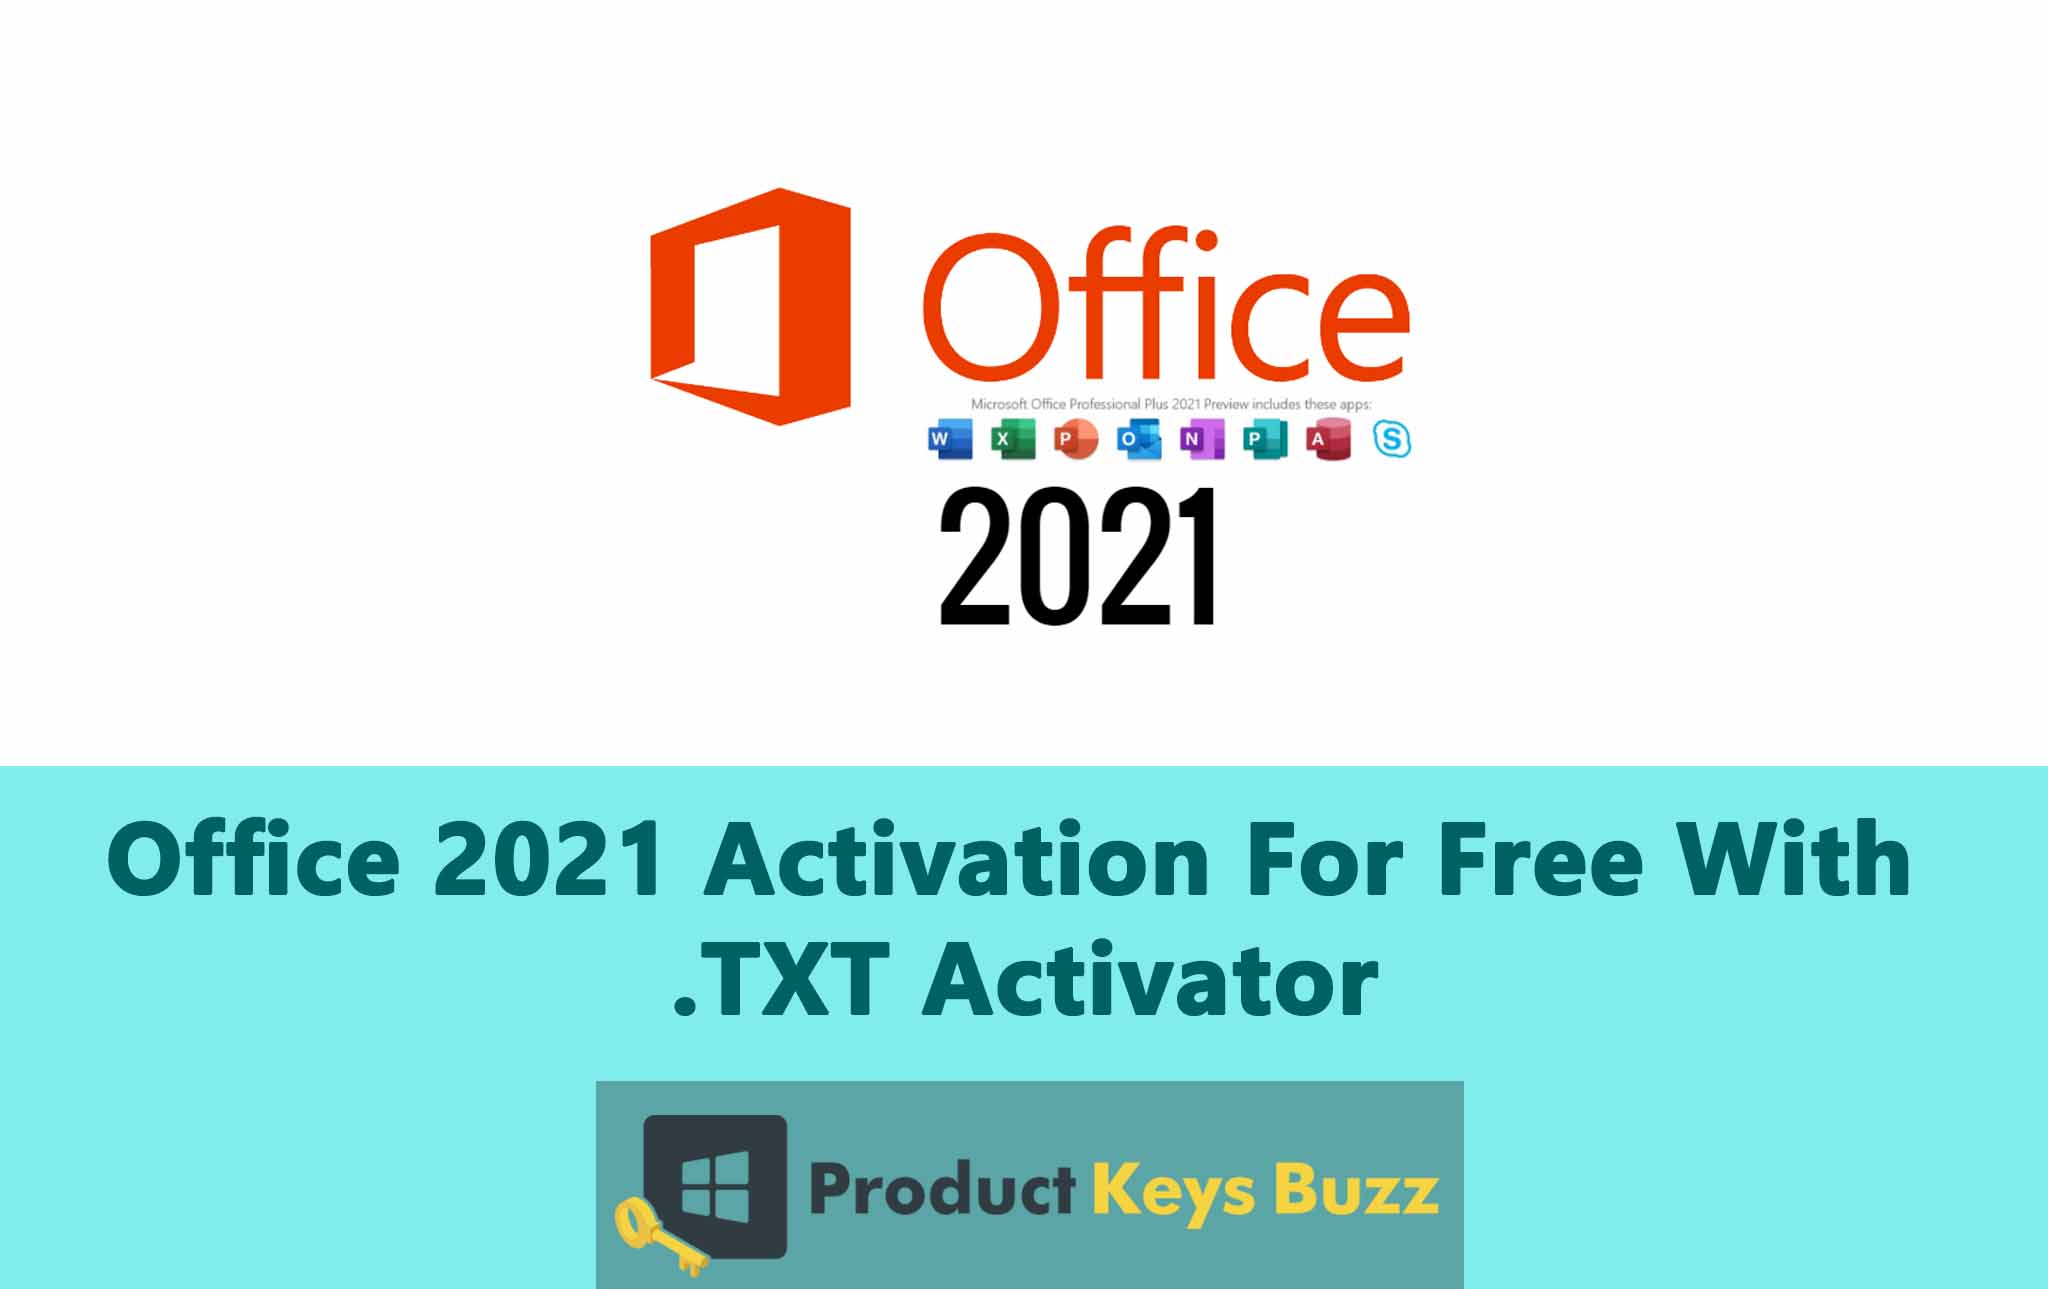 Office 2021 Activation For Free With .TXT Activator